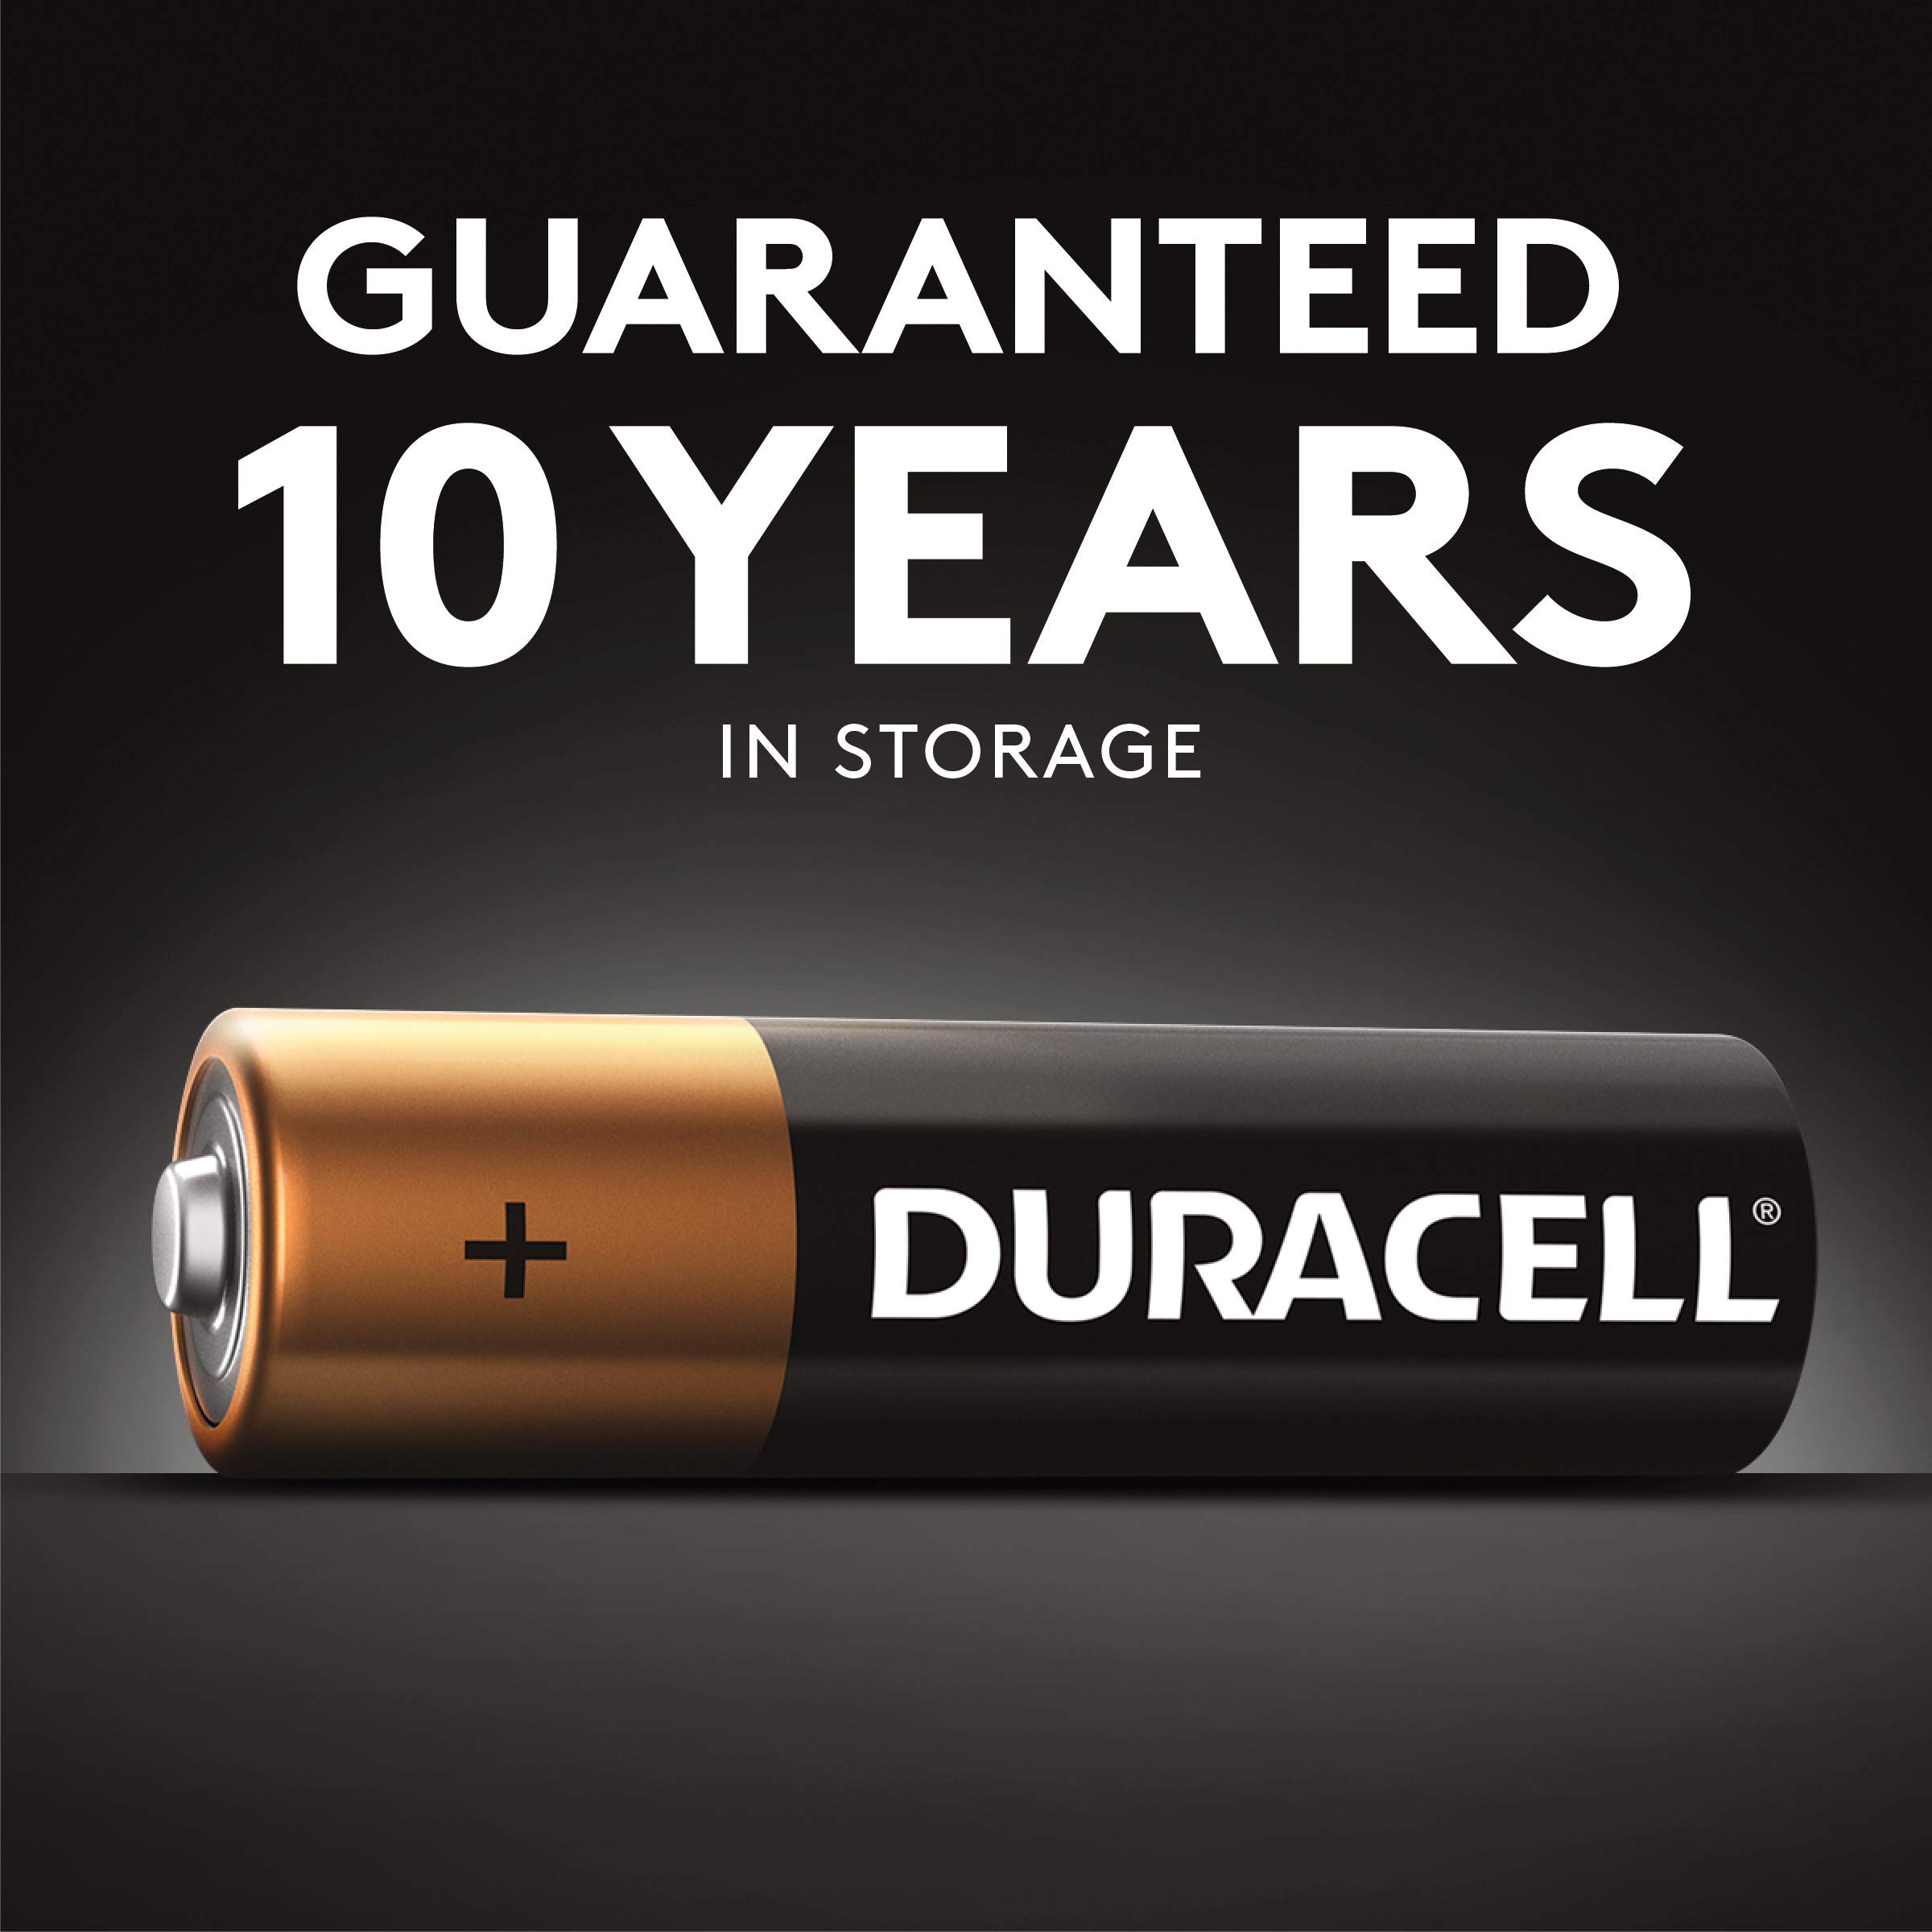 Duracell Coppertop AA Batteries 28 Count Pack Double A Battery with Long-Lasting Power for Household and Office Devices (Ecommerce Packaging)